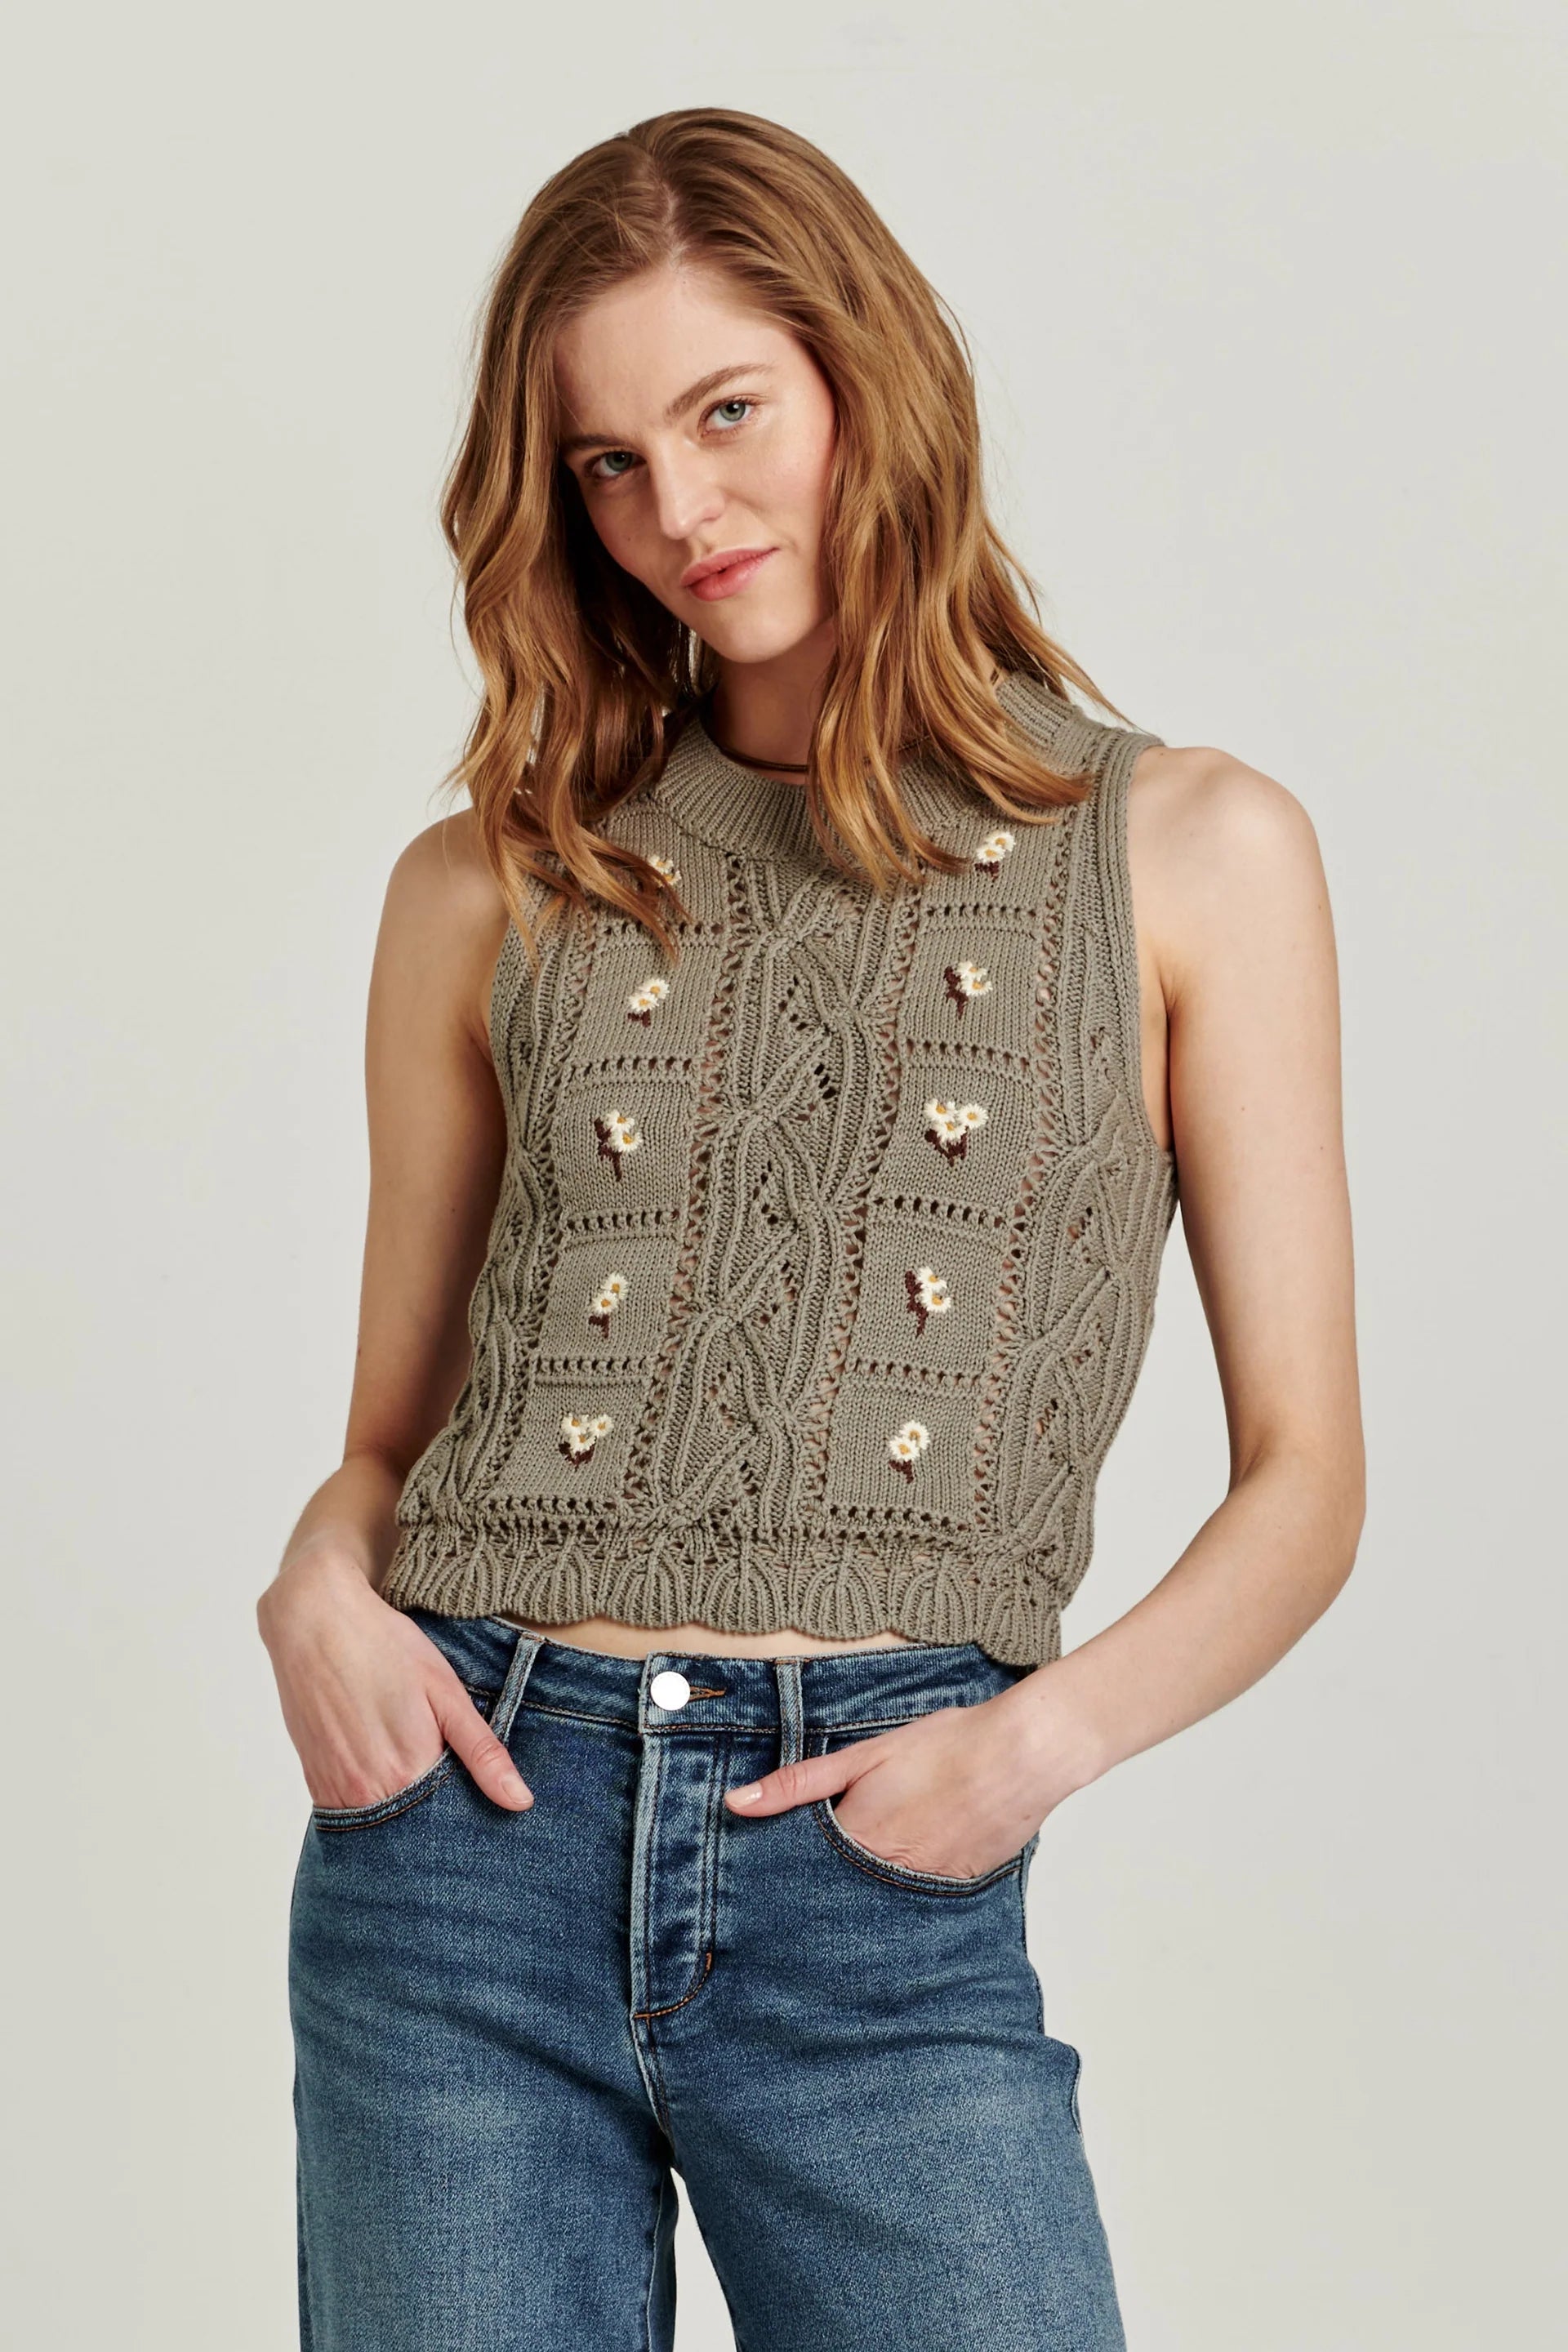 Shop Cable knit sweater tank top